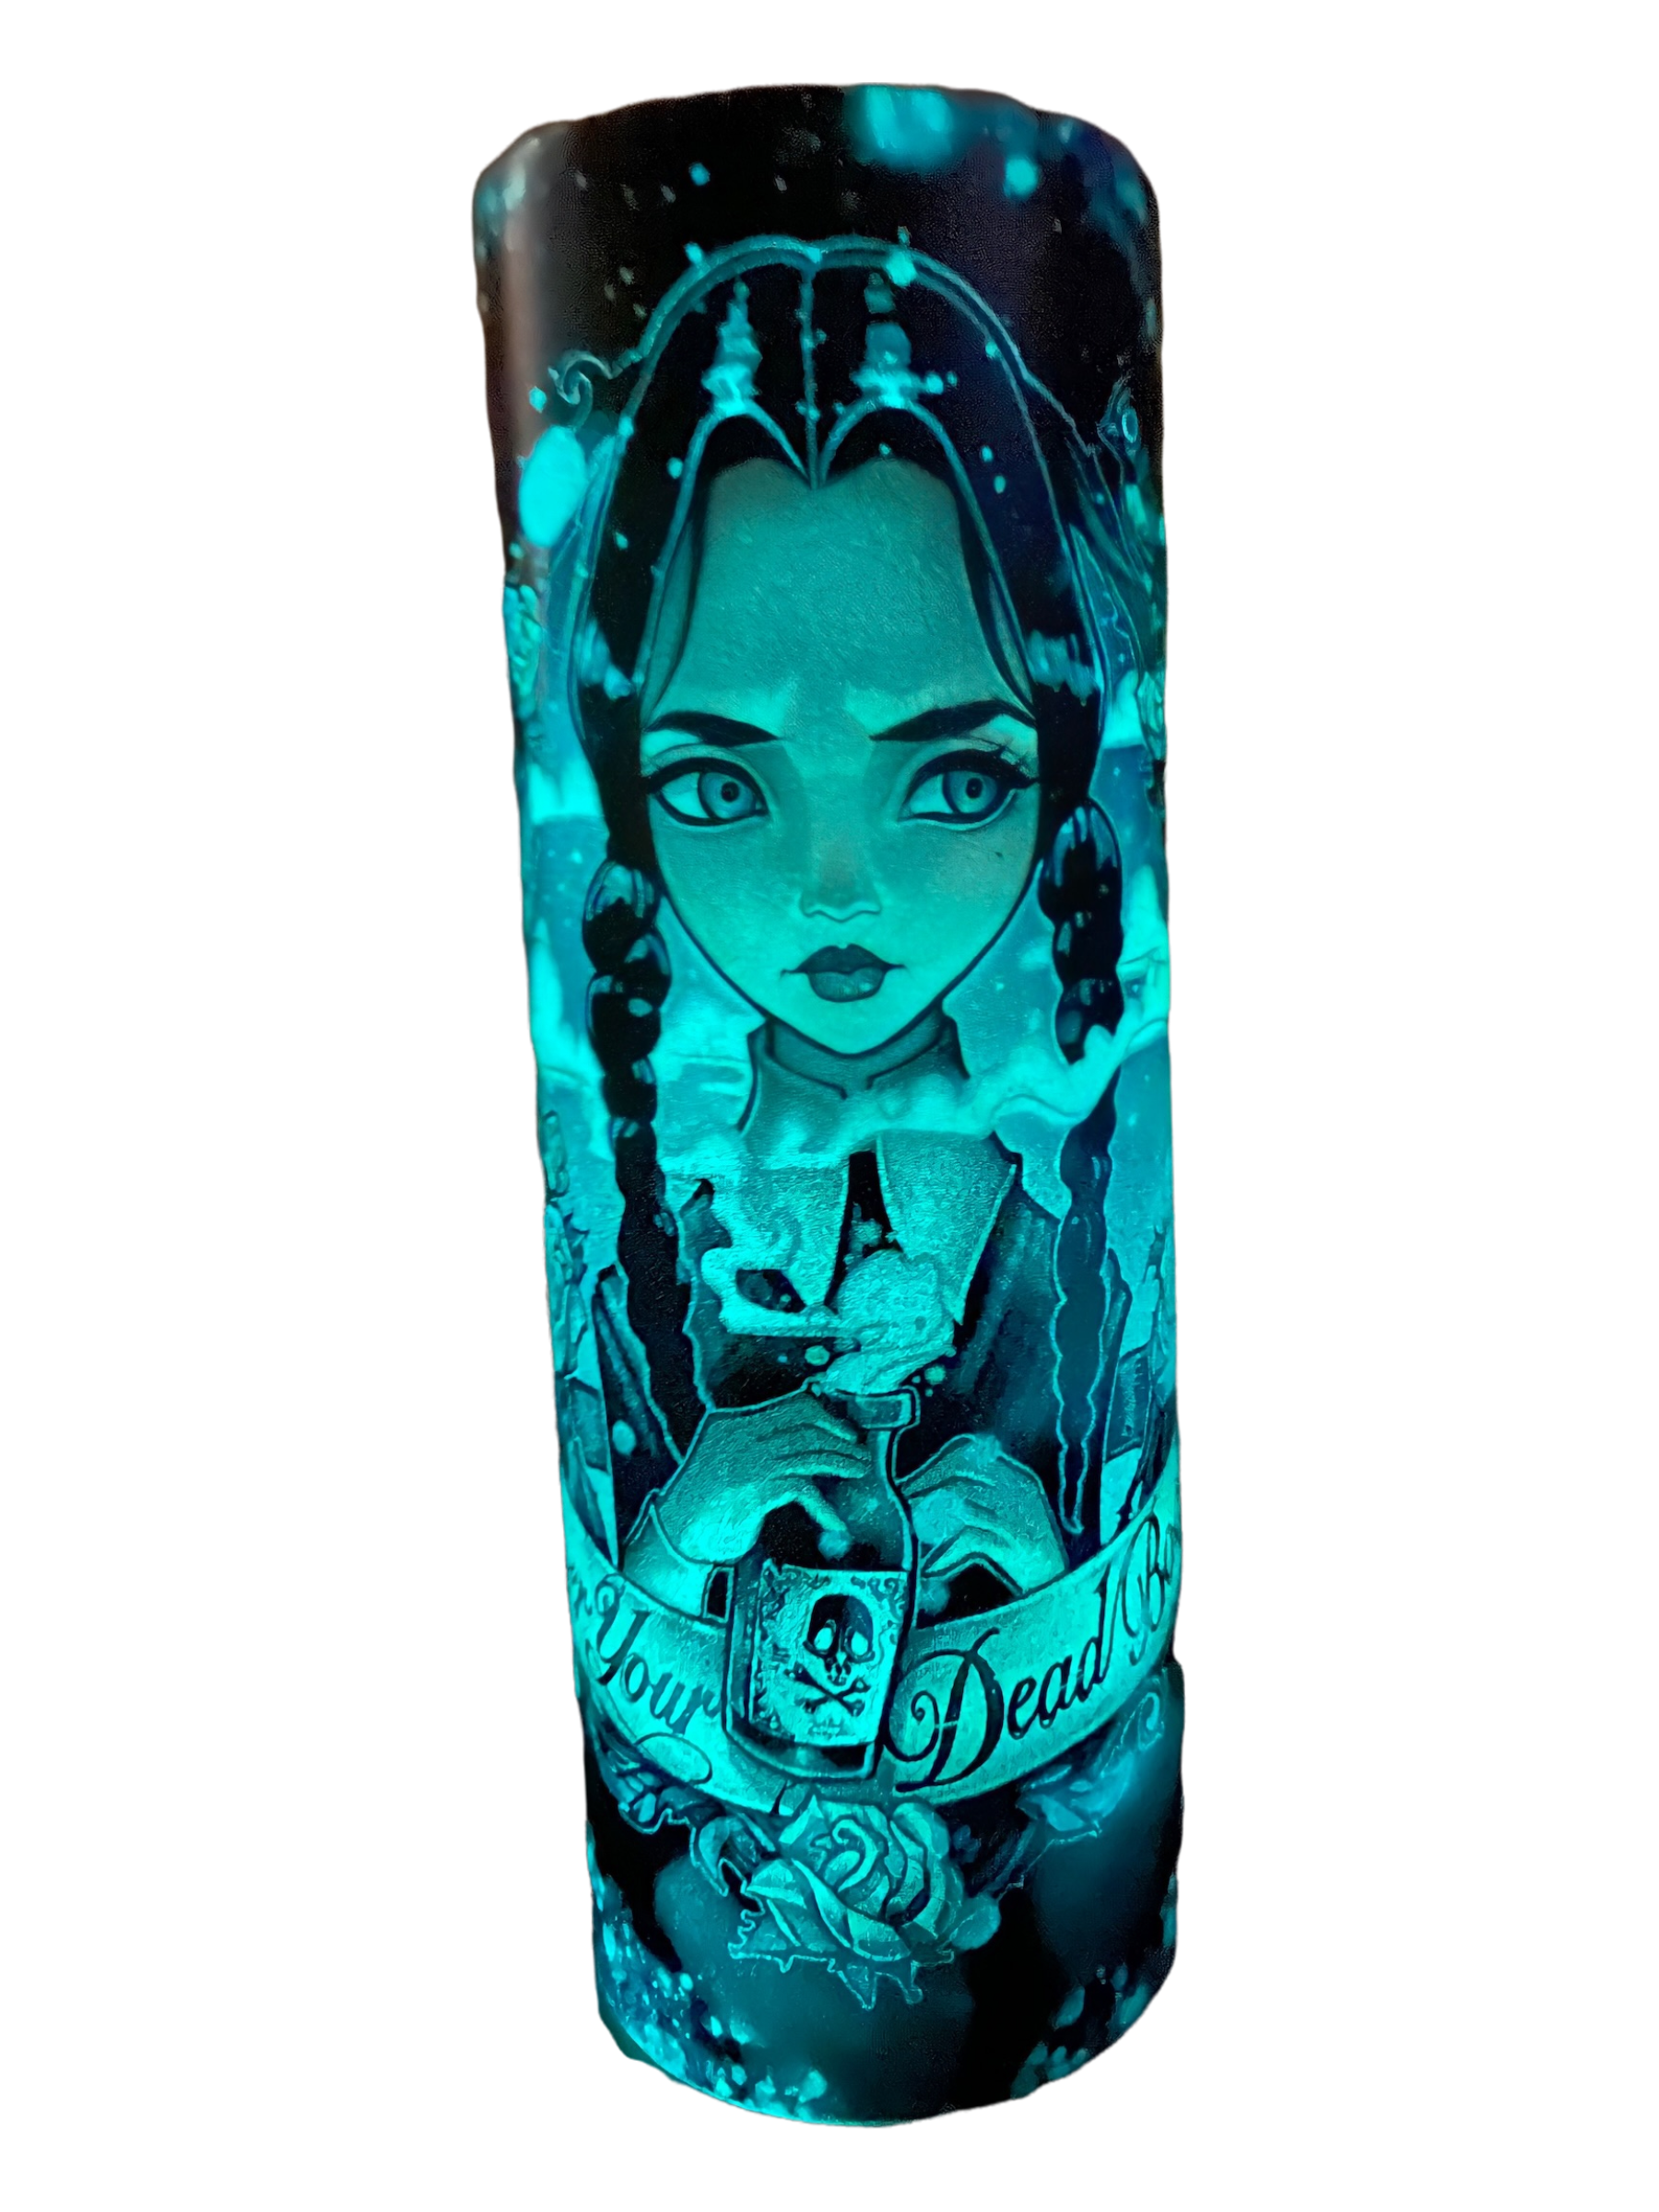 Wednesday Addams Can Cup Glass Tumbler With Bamboo Lid the Addams Family  Tumbler Starbucks Cup Glass Cup Wednesday Tumbler 